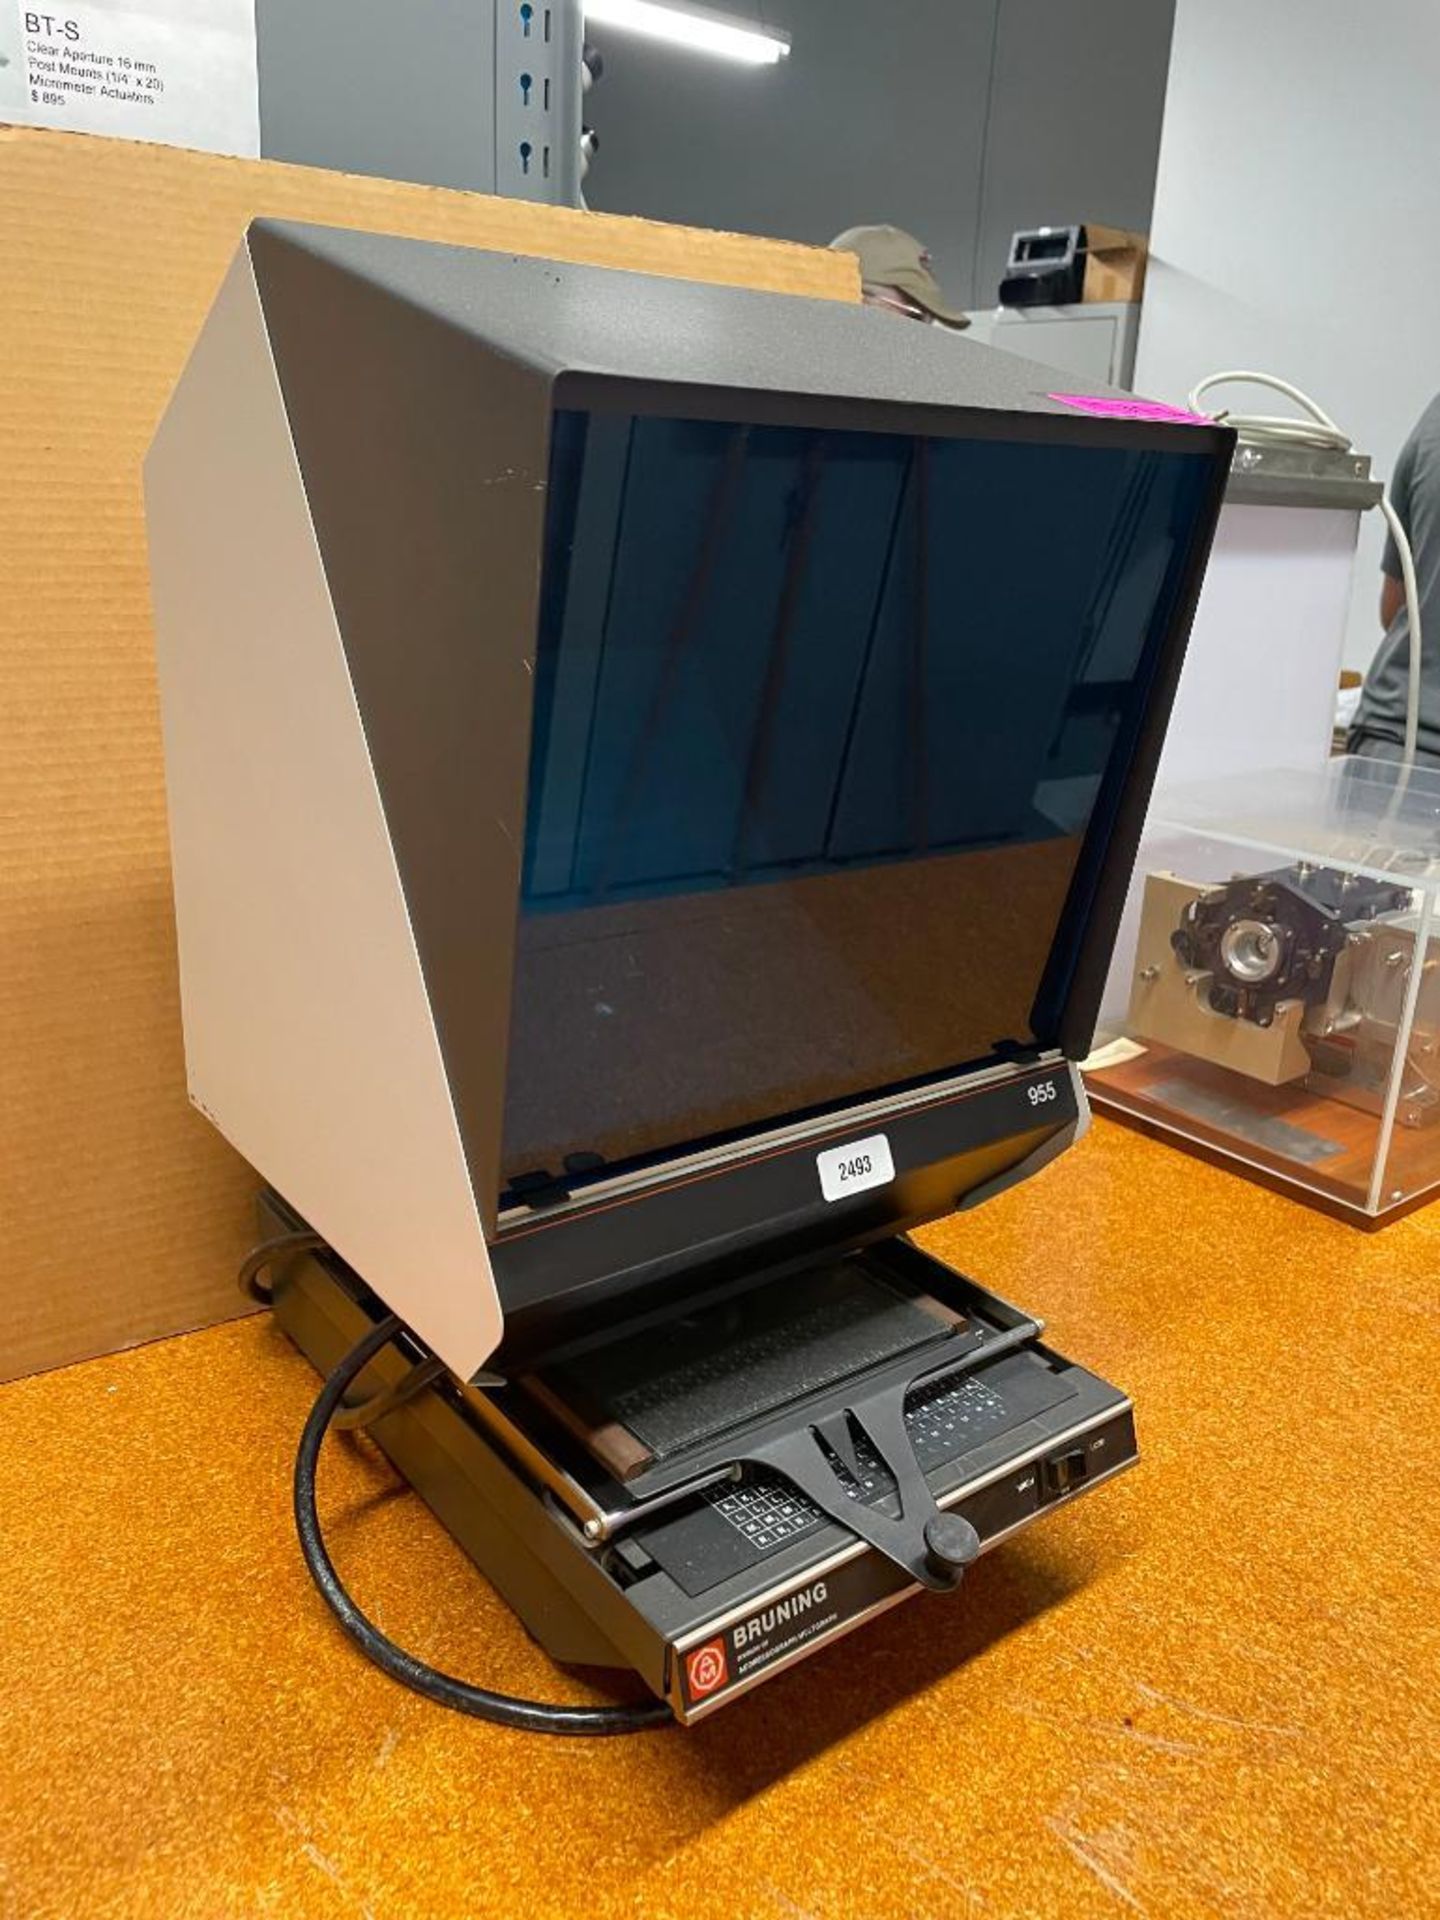 AM BRUNING 955 MICROFICHE PROJECTOR MICROFILM READER BRAND/MODEL: BRUNING 955 INFORMATION: 120 VOLTS - Image 6 of 10